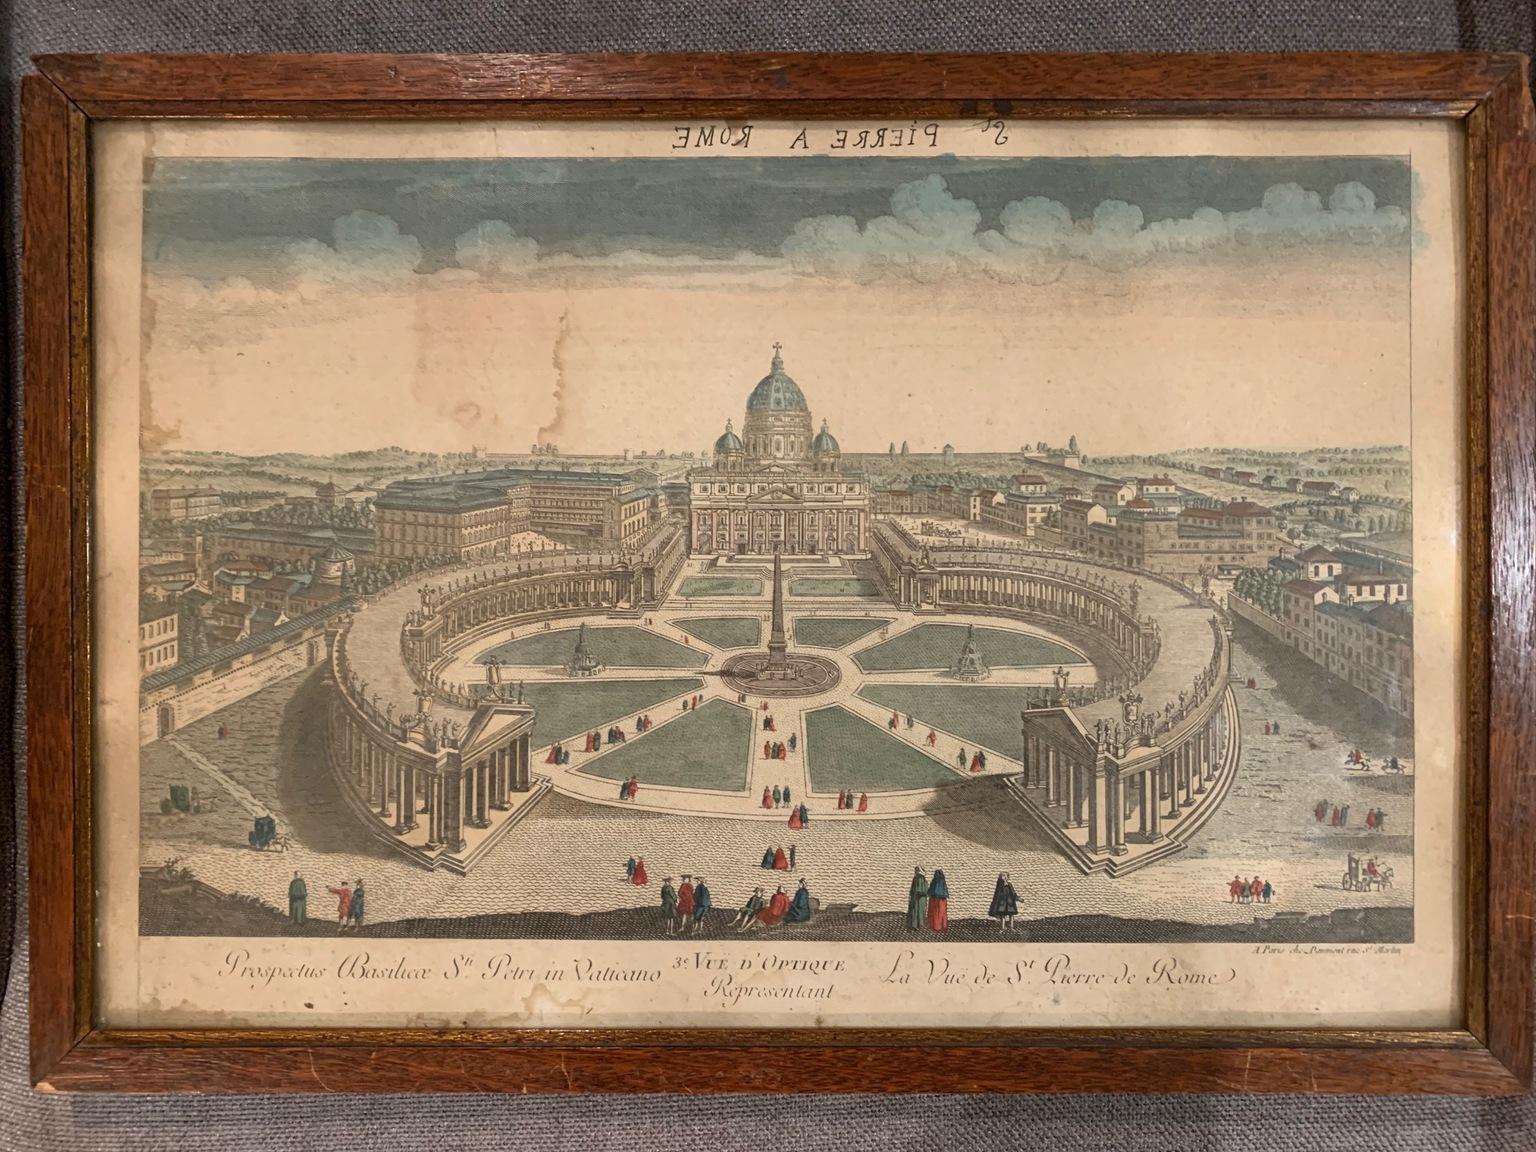 Set of six hand-colored engravings, representing different views, with its original oakwood frame.
Royal Monastery of the Escorial, Toledo Cathedral, interior Santa Genoveva church in Paris, Idealized view of Ancient Rome, St. Peter's Square in the